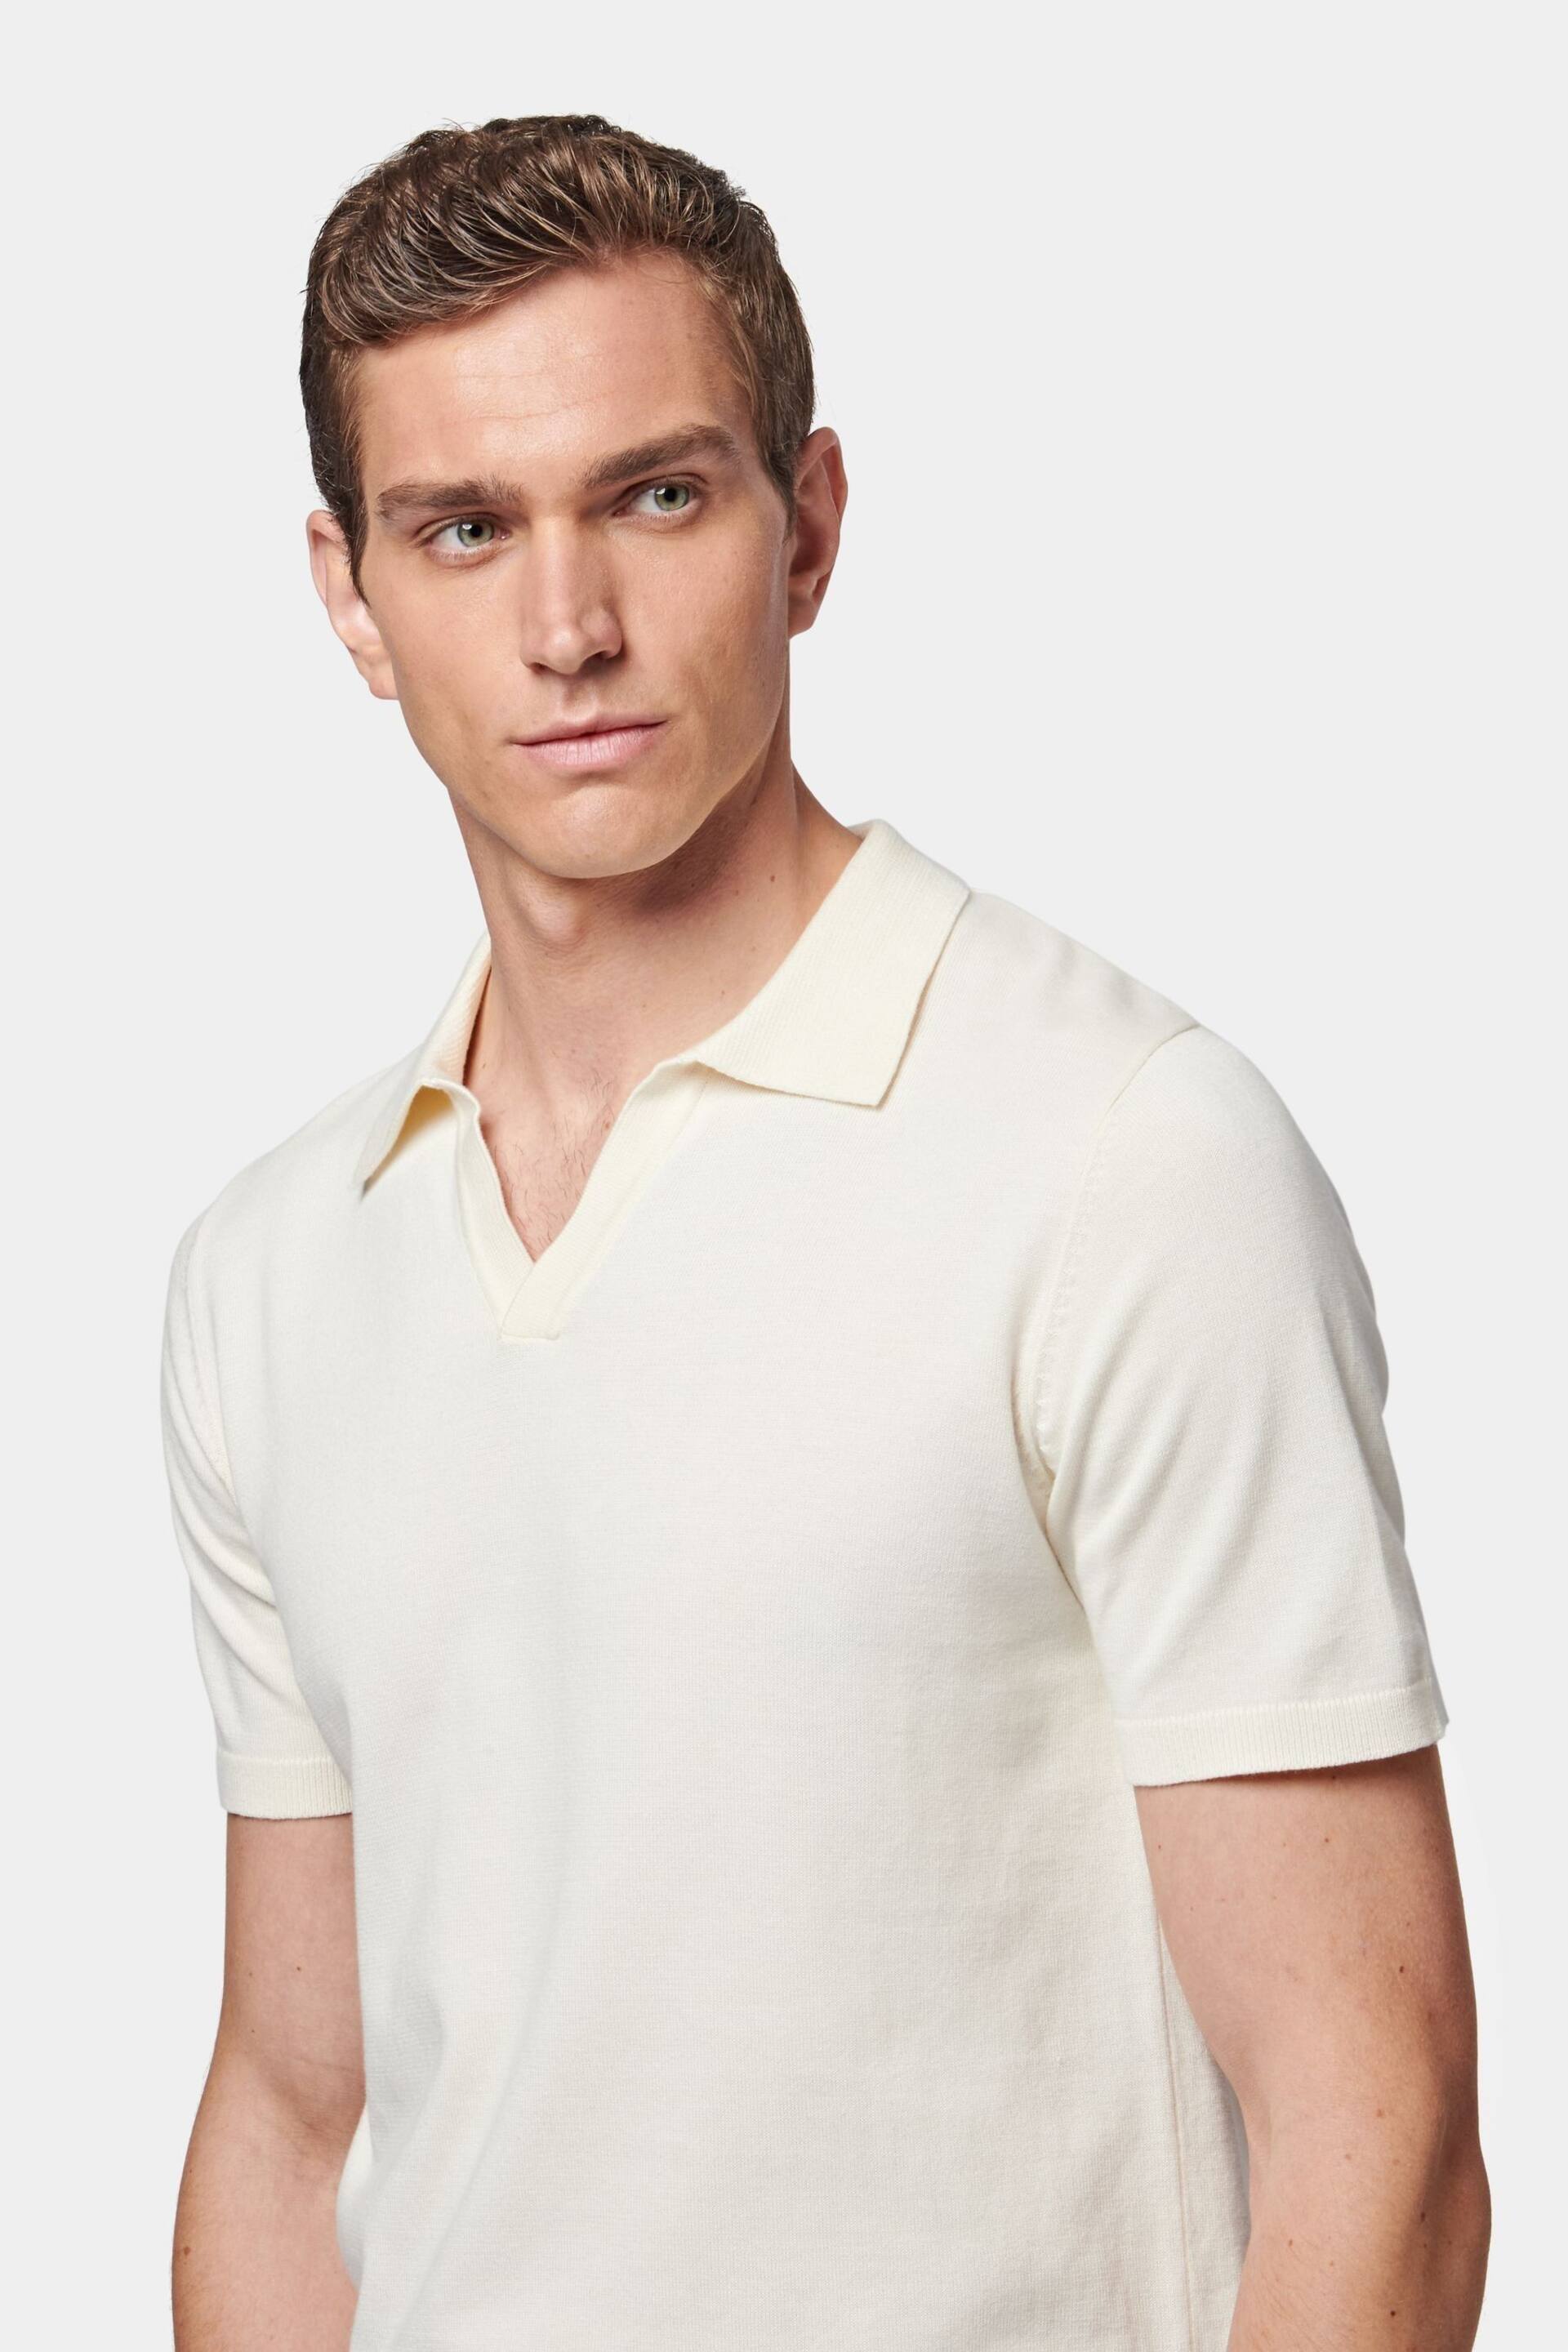 Peckham Rye Knitted Polo Shirt - Image 4 of 7